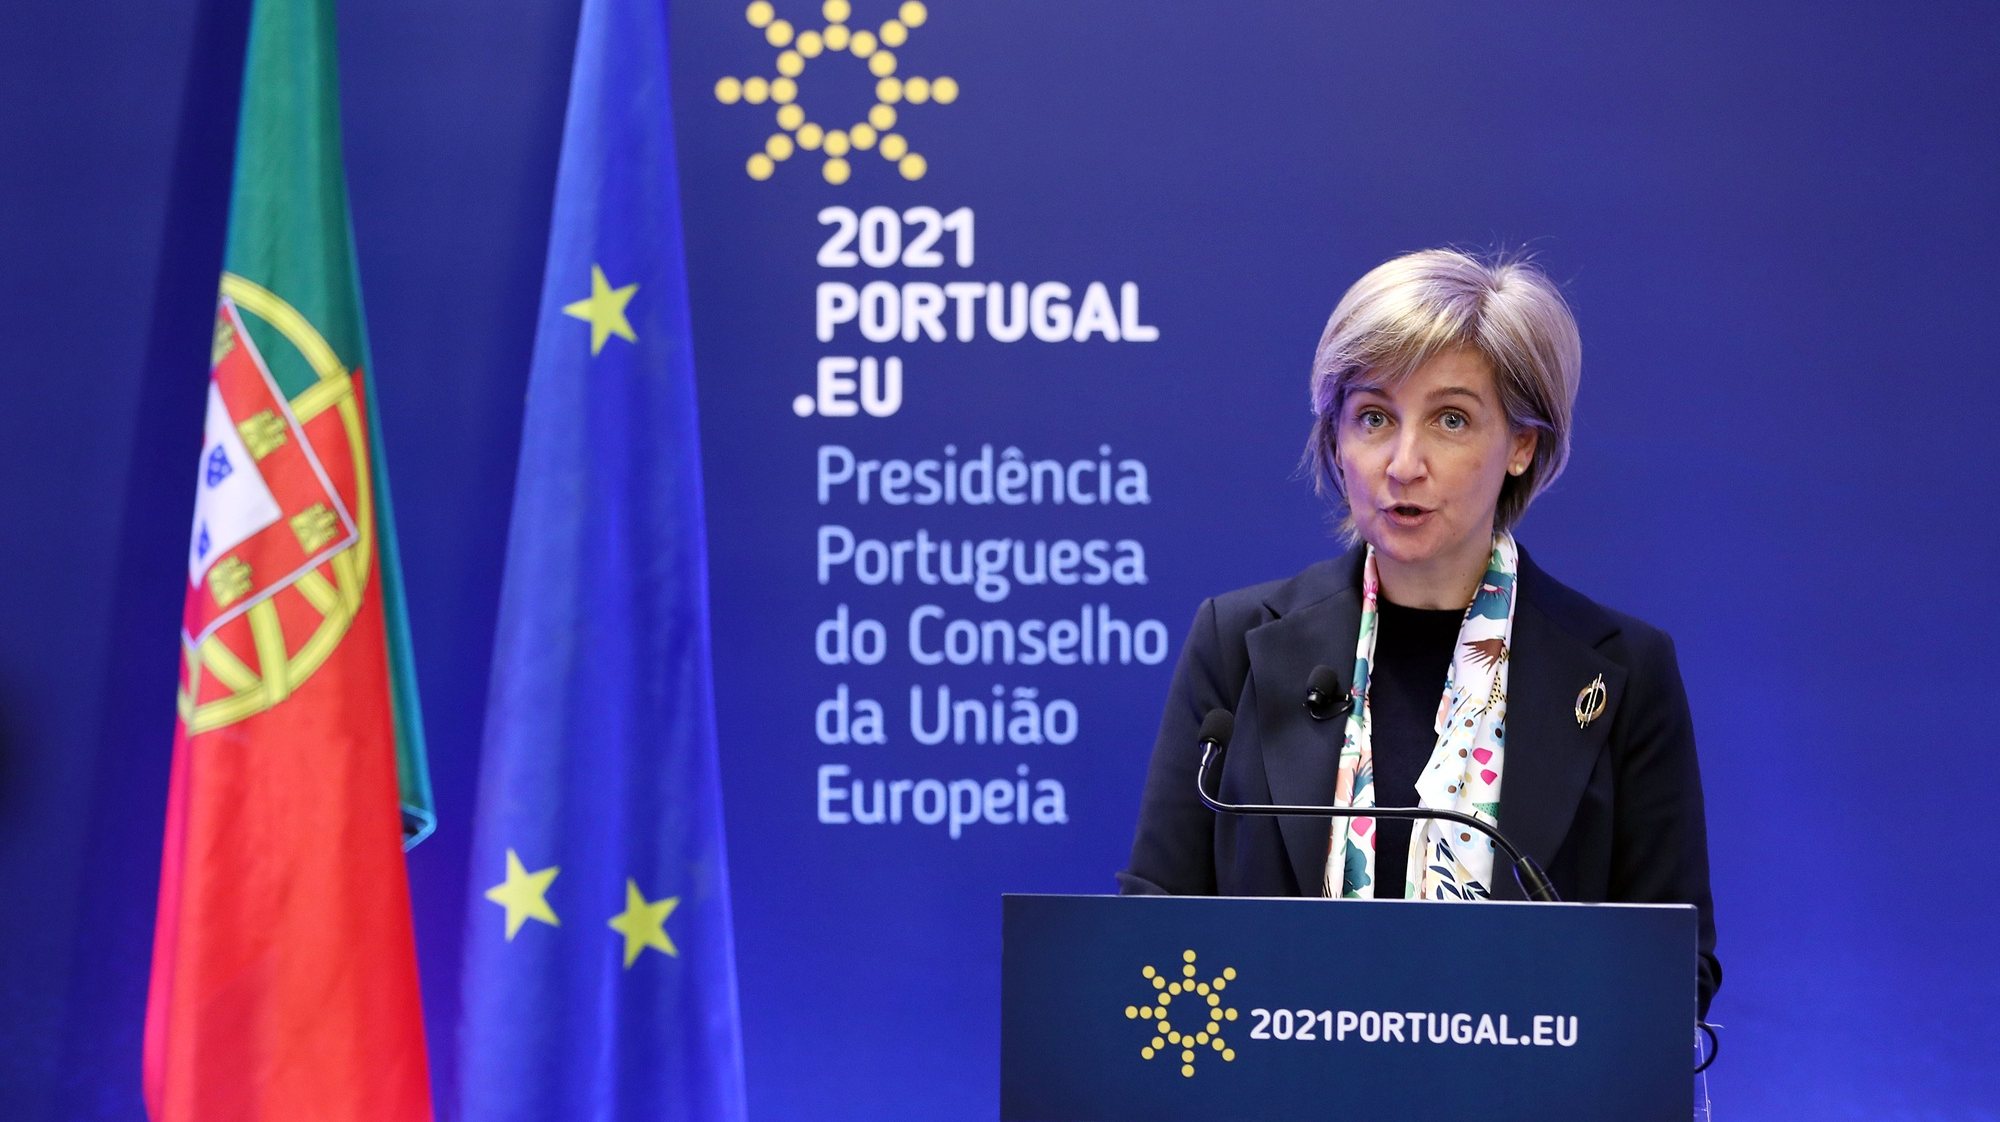 Portuguese Minister for Health Marta Temido attends a conference on strengthening the role of the European Union in the context of global health under the Portuguese Presidency of the Council, in Lisbon, Portugal, 25 March 2021. The conference is dedicated to the topic of reinforcement of the role of the EU in global health, diplomacy, leadership in the plan for universal health coverage, and the impact of climate change on health. ANTONIO PEDRO SANTOS/LUSA